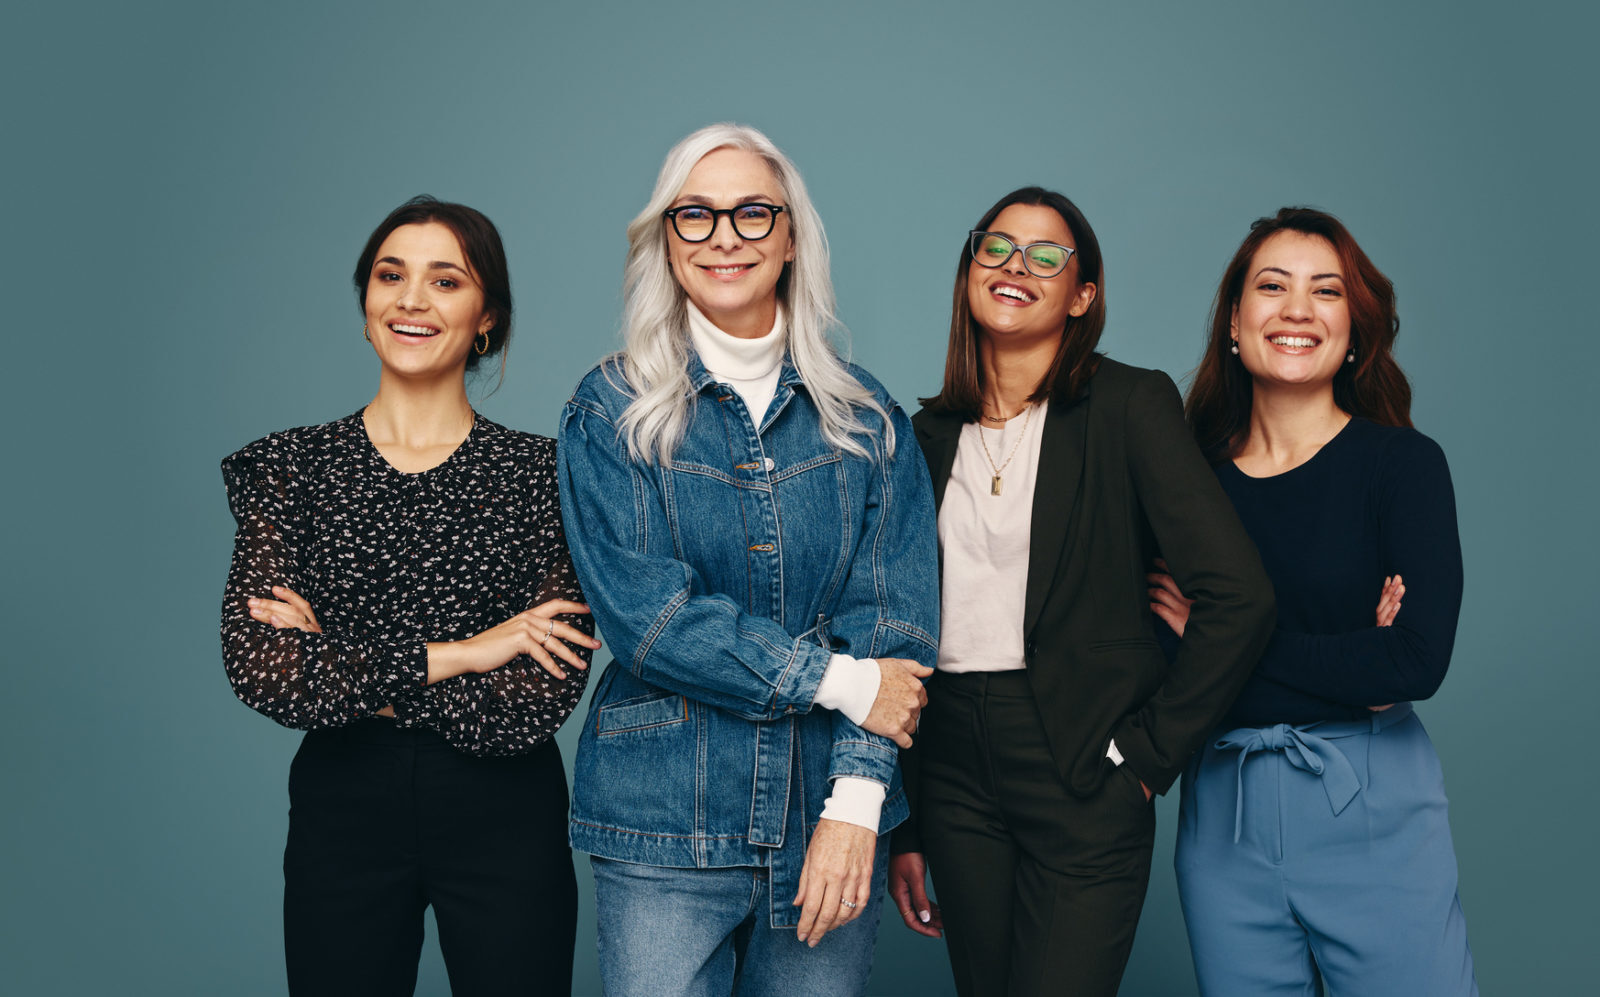 Multicultural group of women smiling at the camera with confidence. Four women of different ages standing together against a studio background. Strong independent women embracing empowerment.